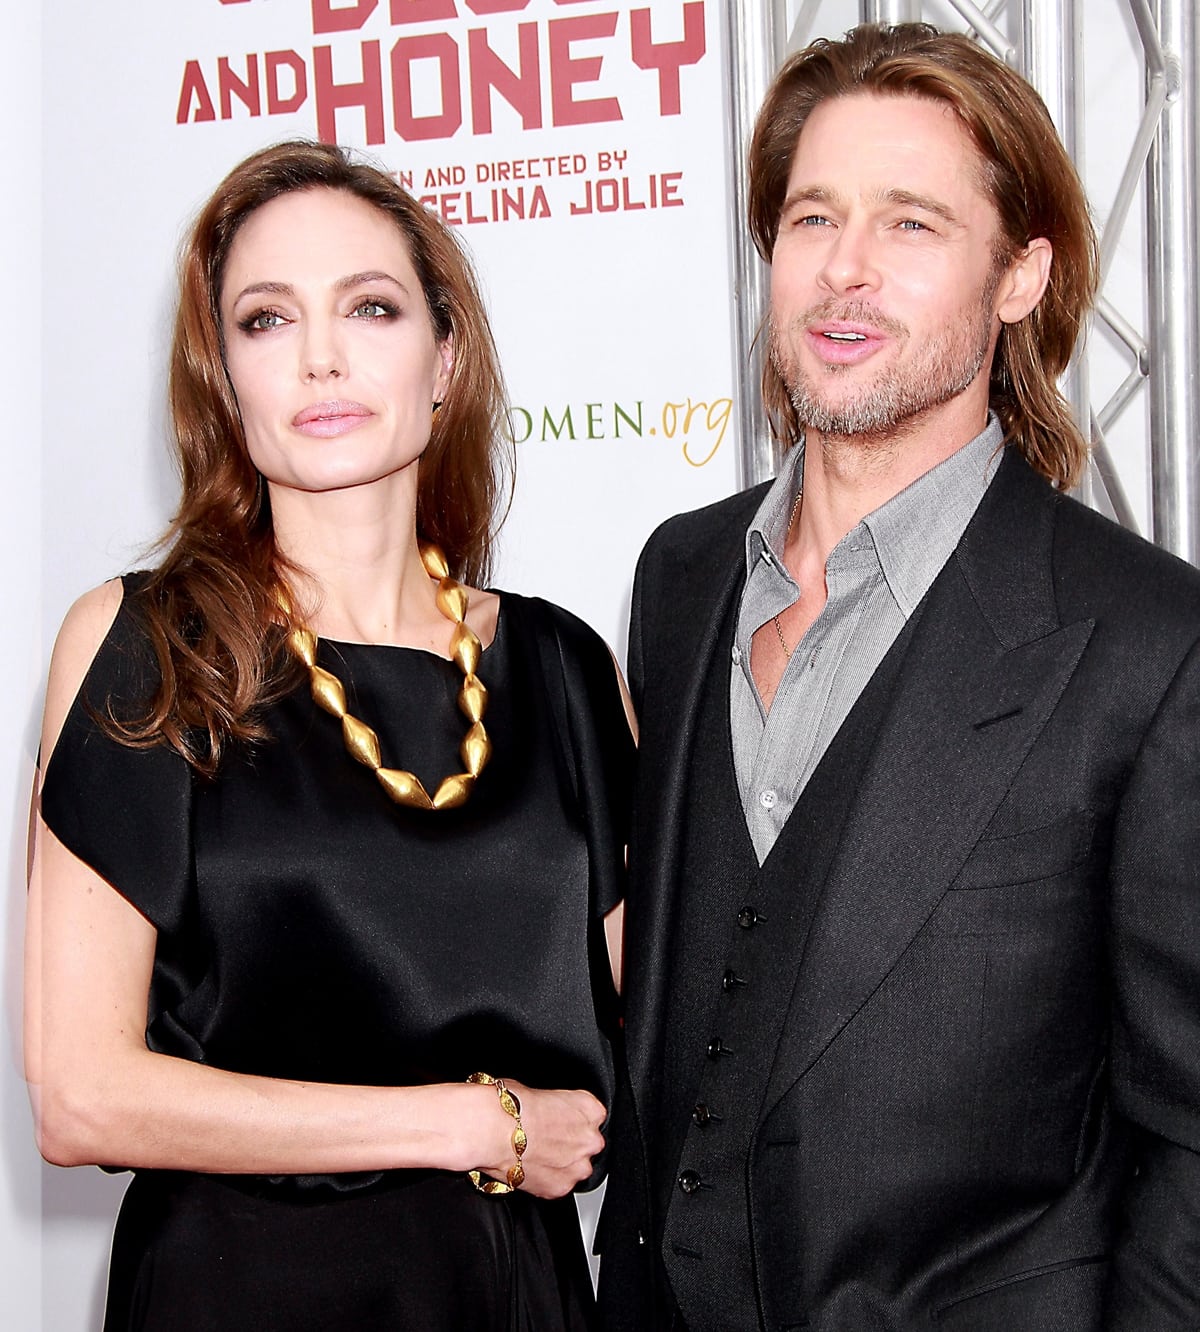 Angelina Jolie and Brad Pitt at the premiere of "In the Land of Blood and Honey"